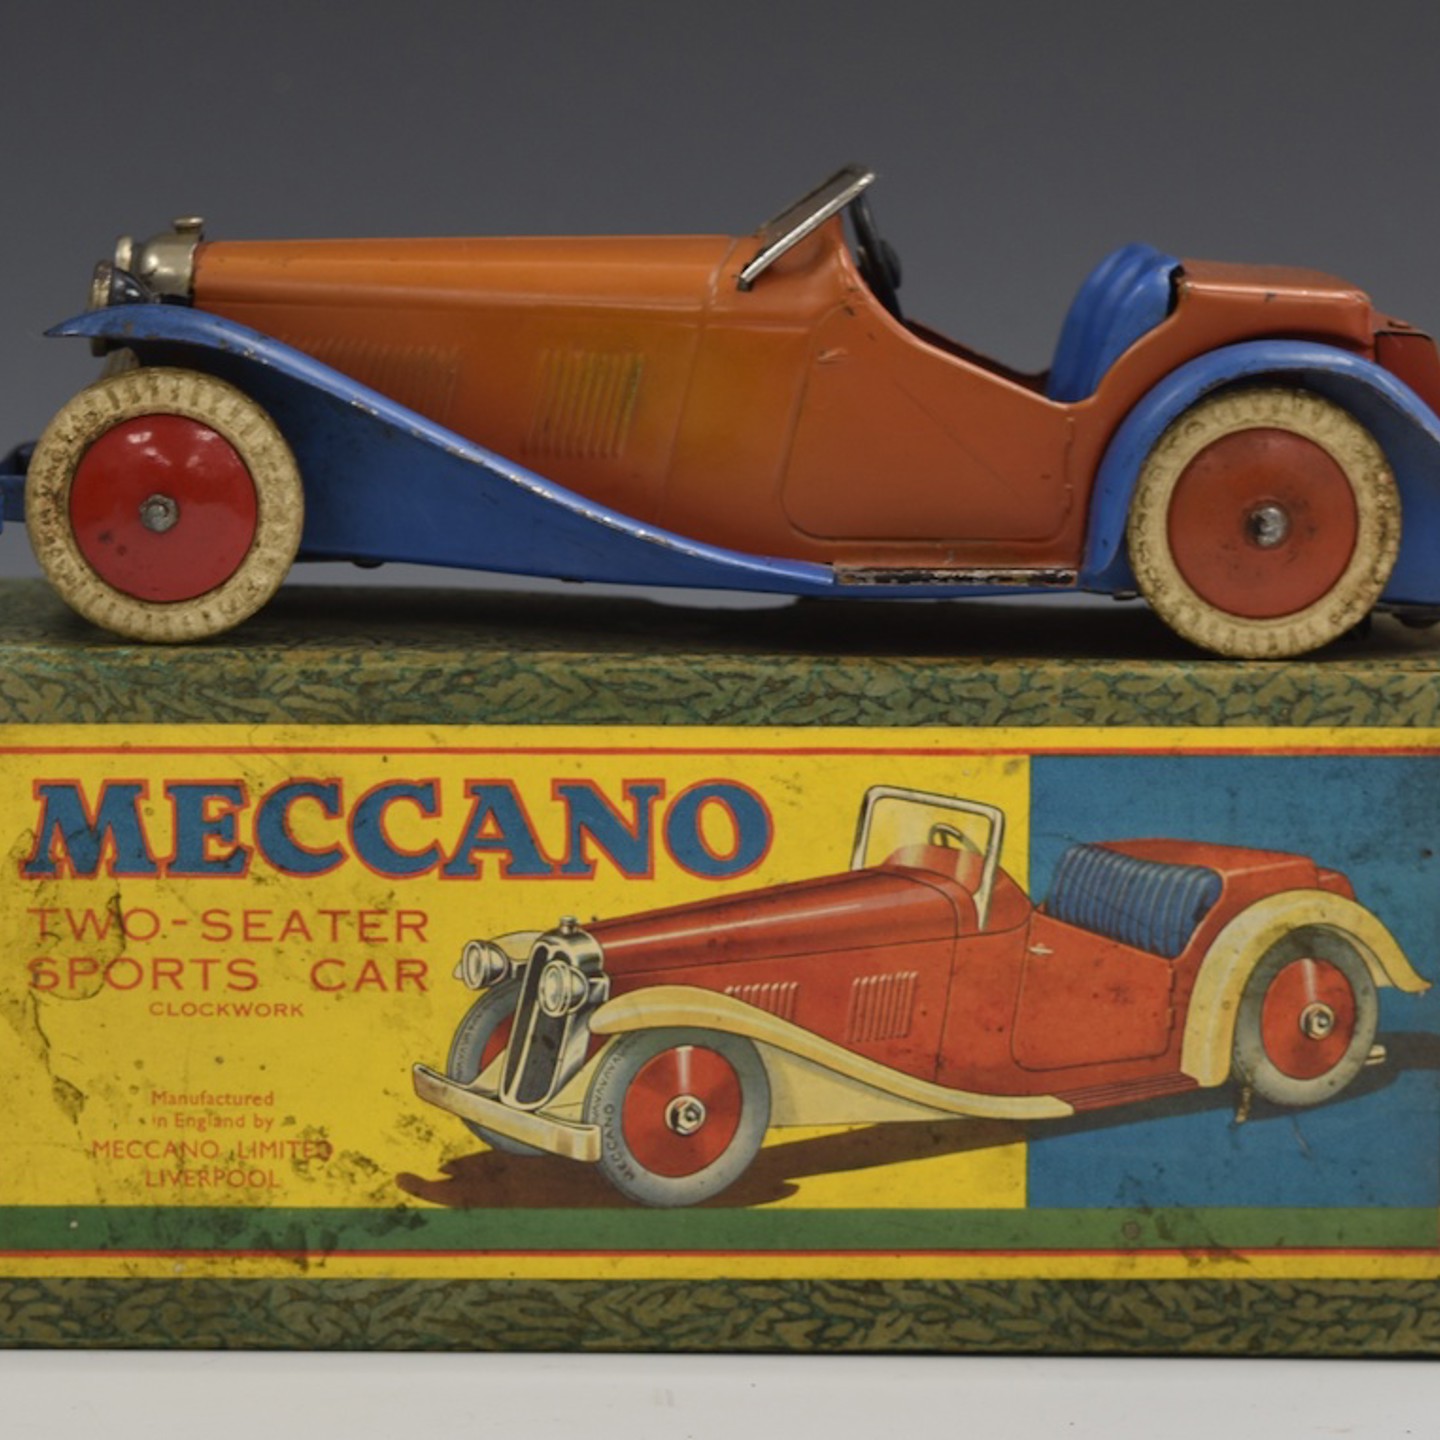 Meccano Clockwork Tinplate Two Seater Sports Car With Red Body And Hubs And Blue Wheel Arches, Bumper And Seats, M223, In Original Box. Sold £500